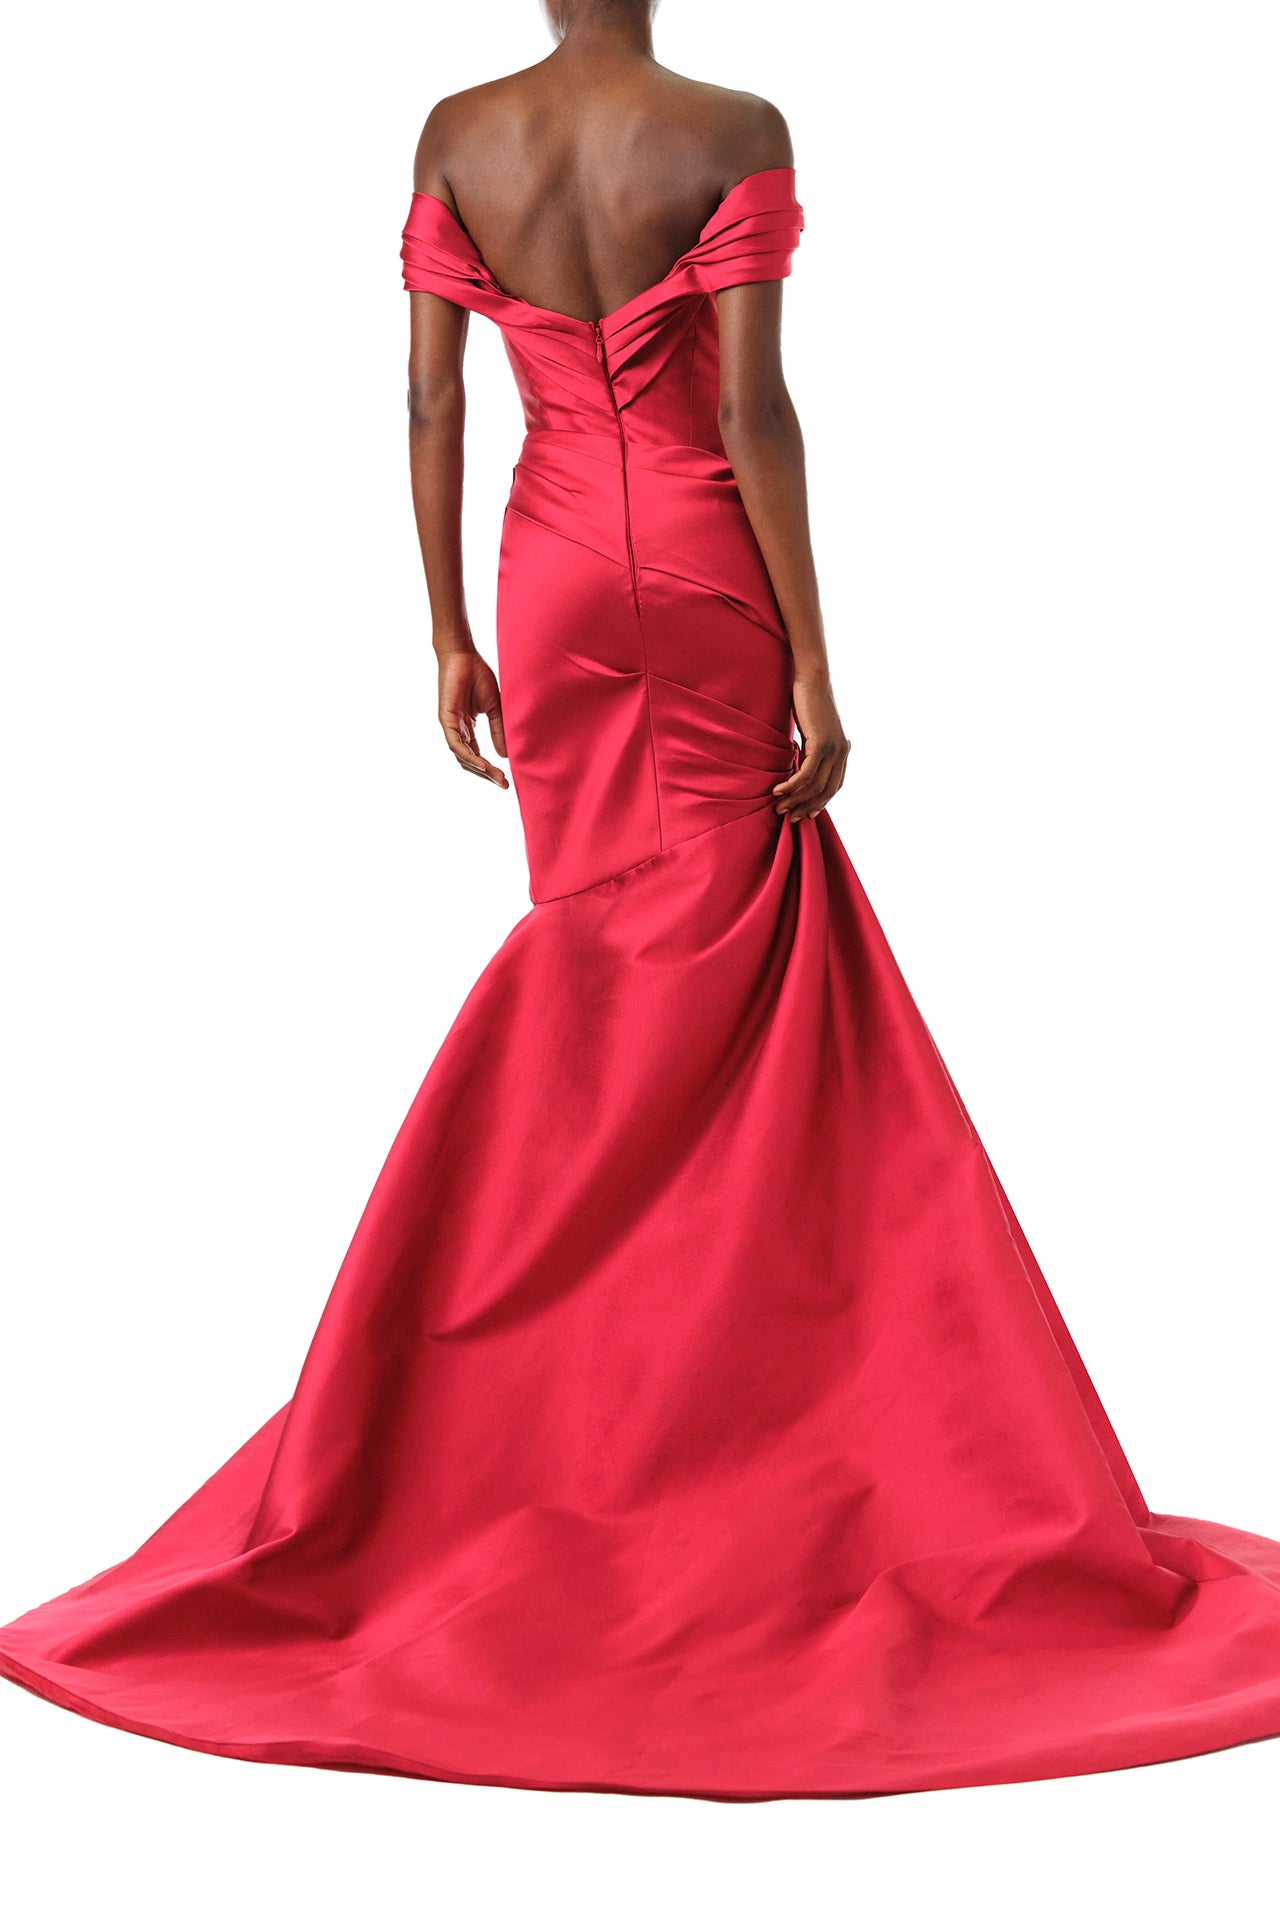 Monique Lhuillier Fall 2024 scarlet mikado, off-the-shoulder, draped gown with trumpet skirt and low back - back.